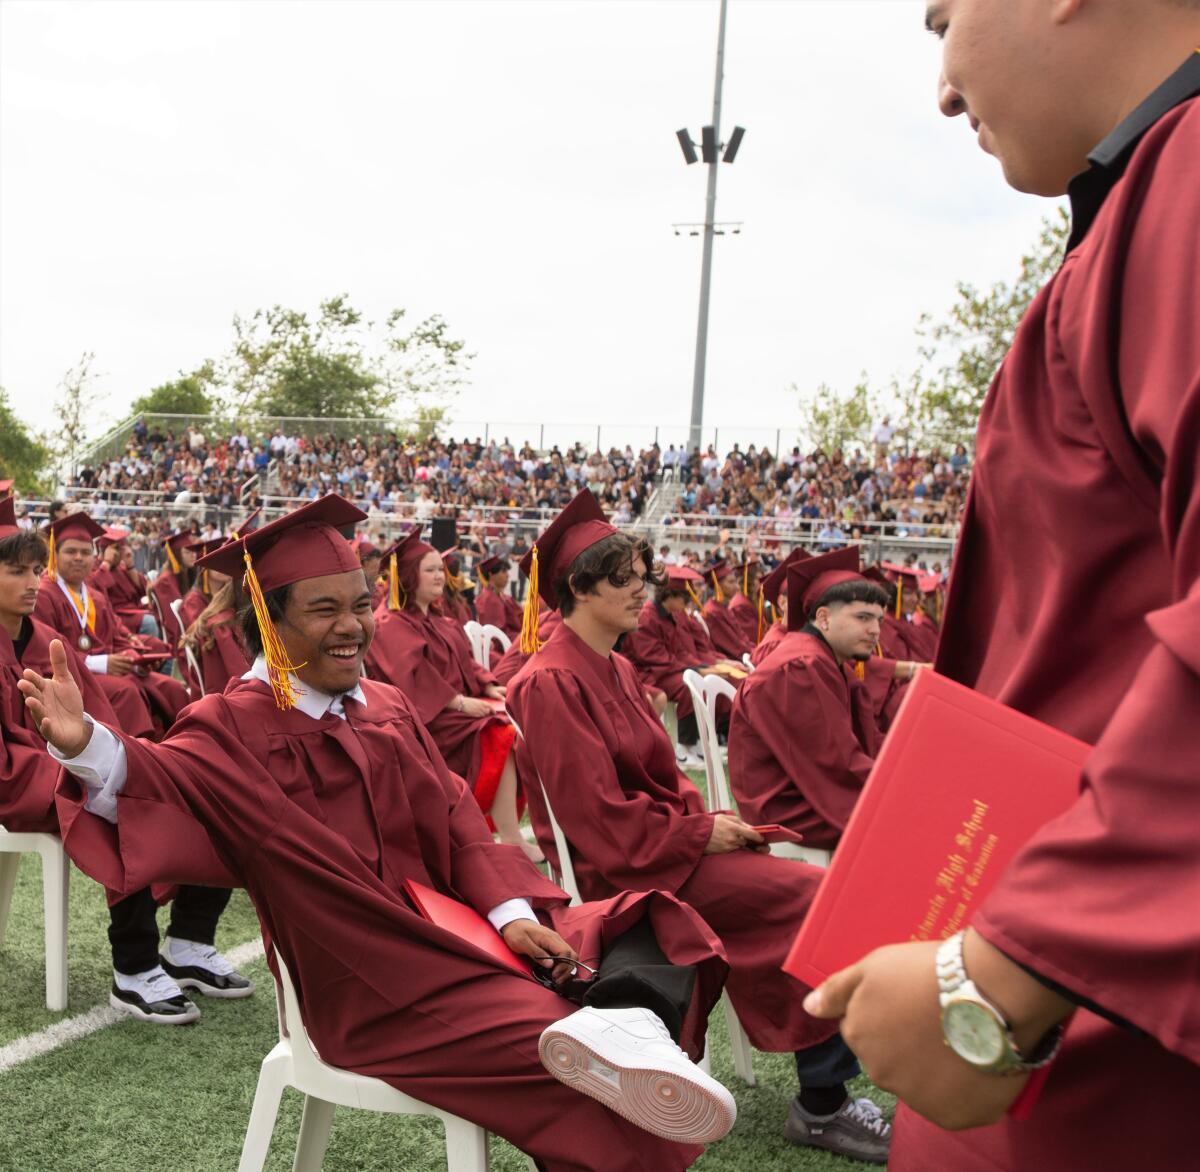 Randy Harry offers a high five to Angel Torres during the Estancia High School graduation.